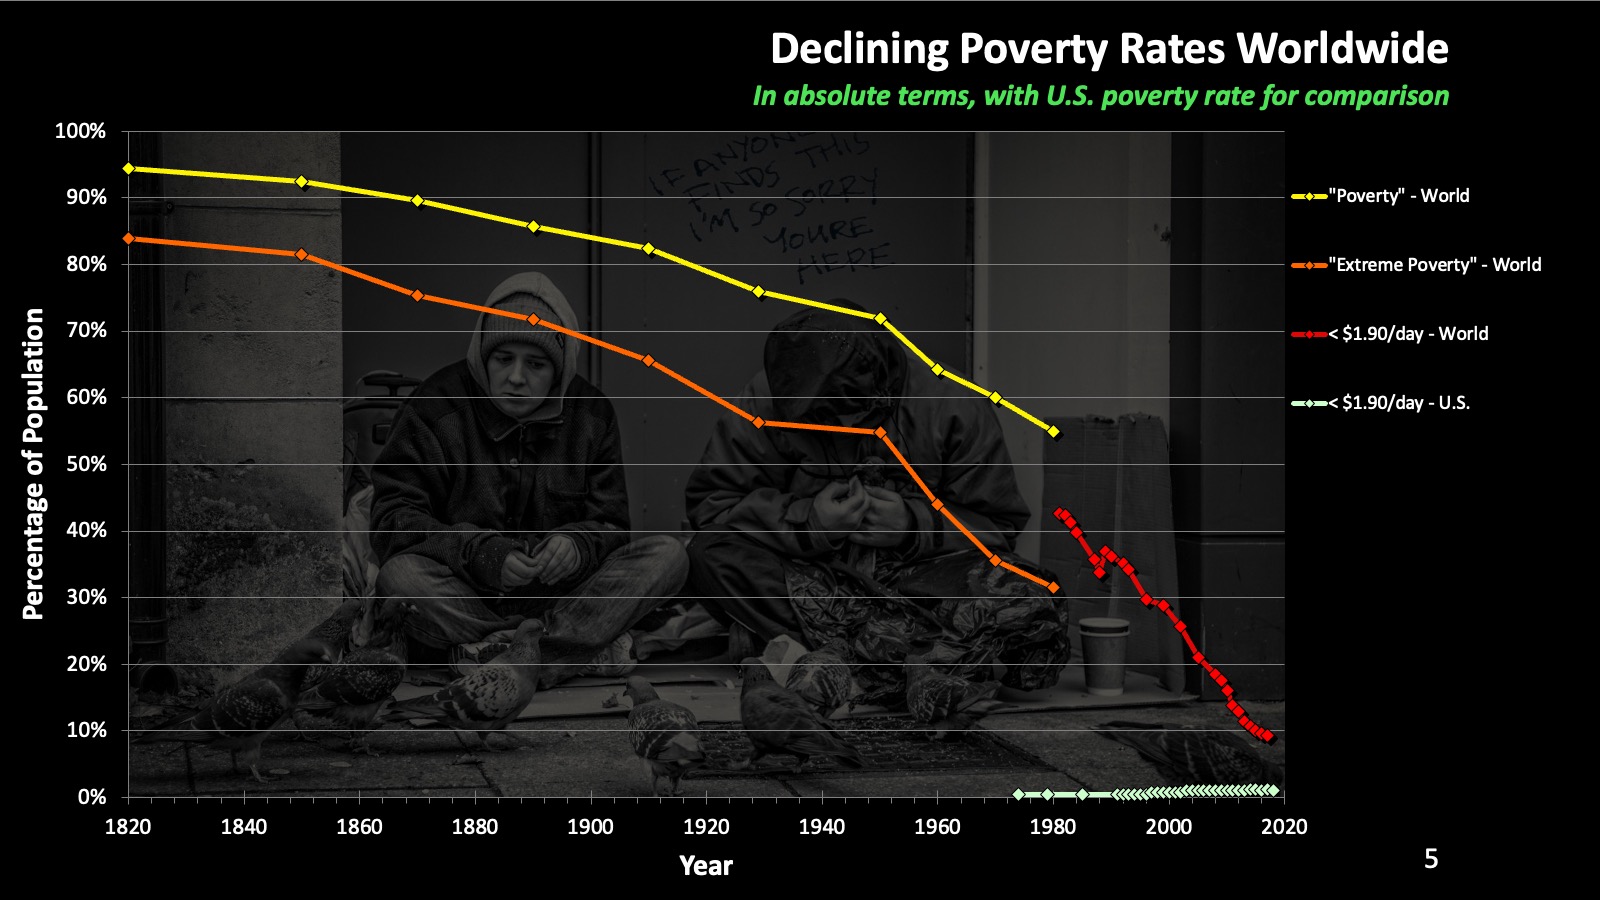 Declining poverty rates worldwide